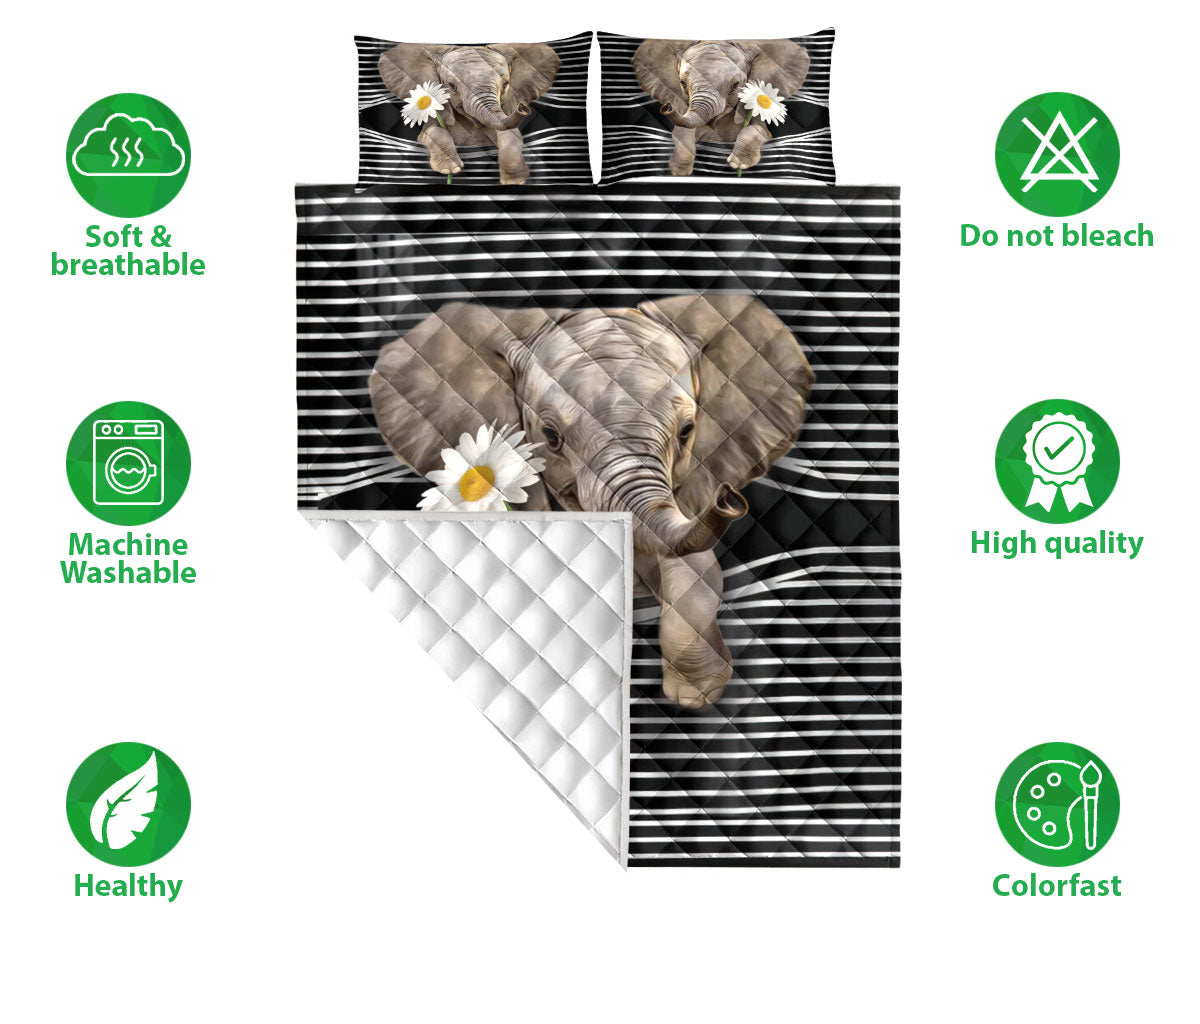 Ohaprints-Quilt-Bed-Set-Pillowcase-Baby-Elephant-White-Daisy-Wild-Animal-Striped-Patten-Black-Blanket-Bedspread-Bedding-216-Double (70'' x 80'')